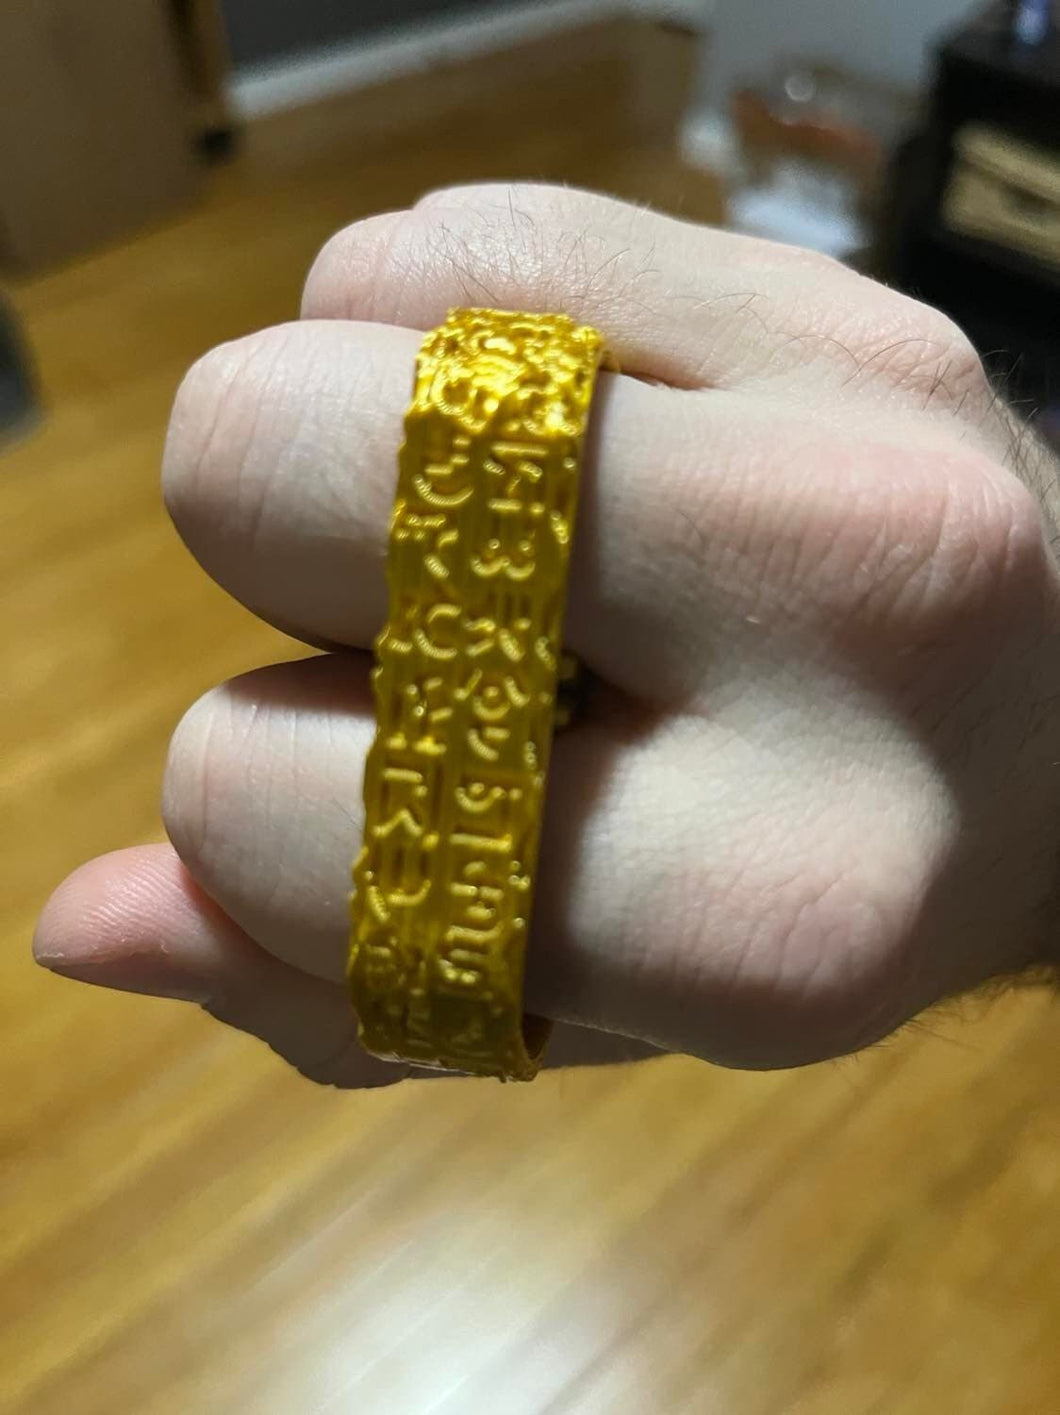 DnD Ring - Ring of Spell Storing - Cosplay Prop - Spell Ring - Dungeons and Dragons Prop - Spell Scroll